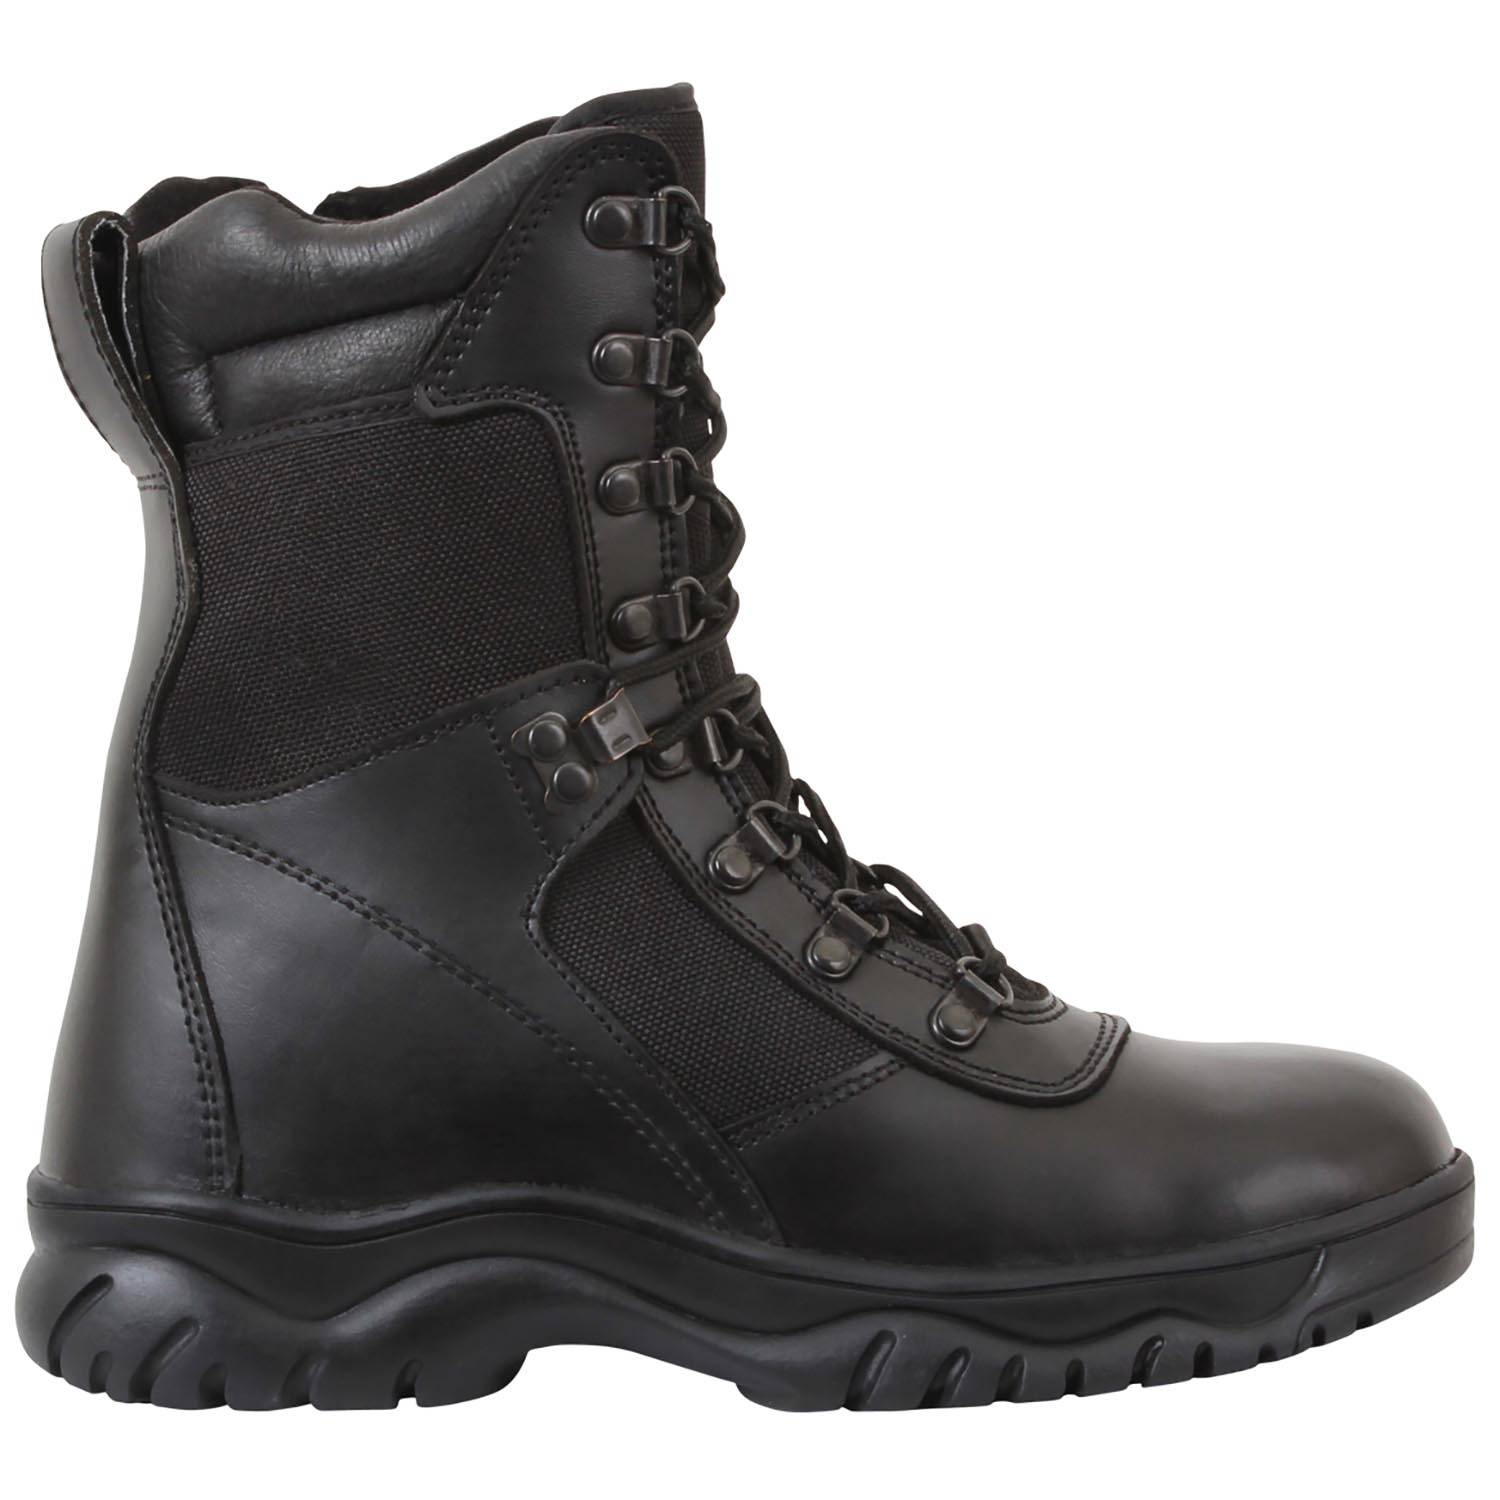 Rothco Forced Entry 8 Inch Tactical Boot With Side Zipper